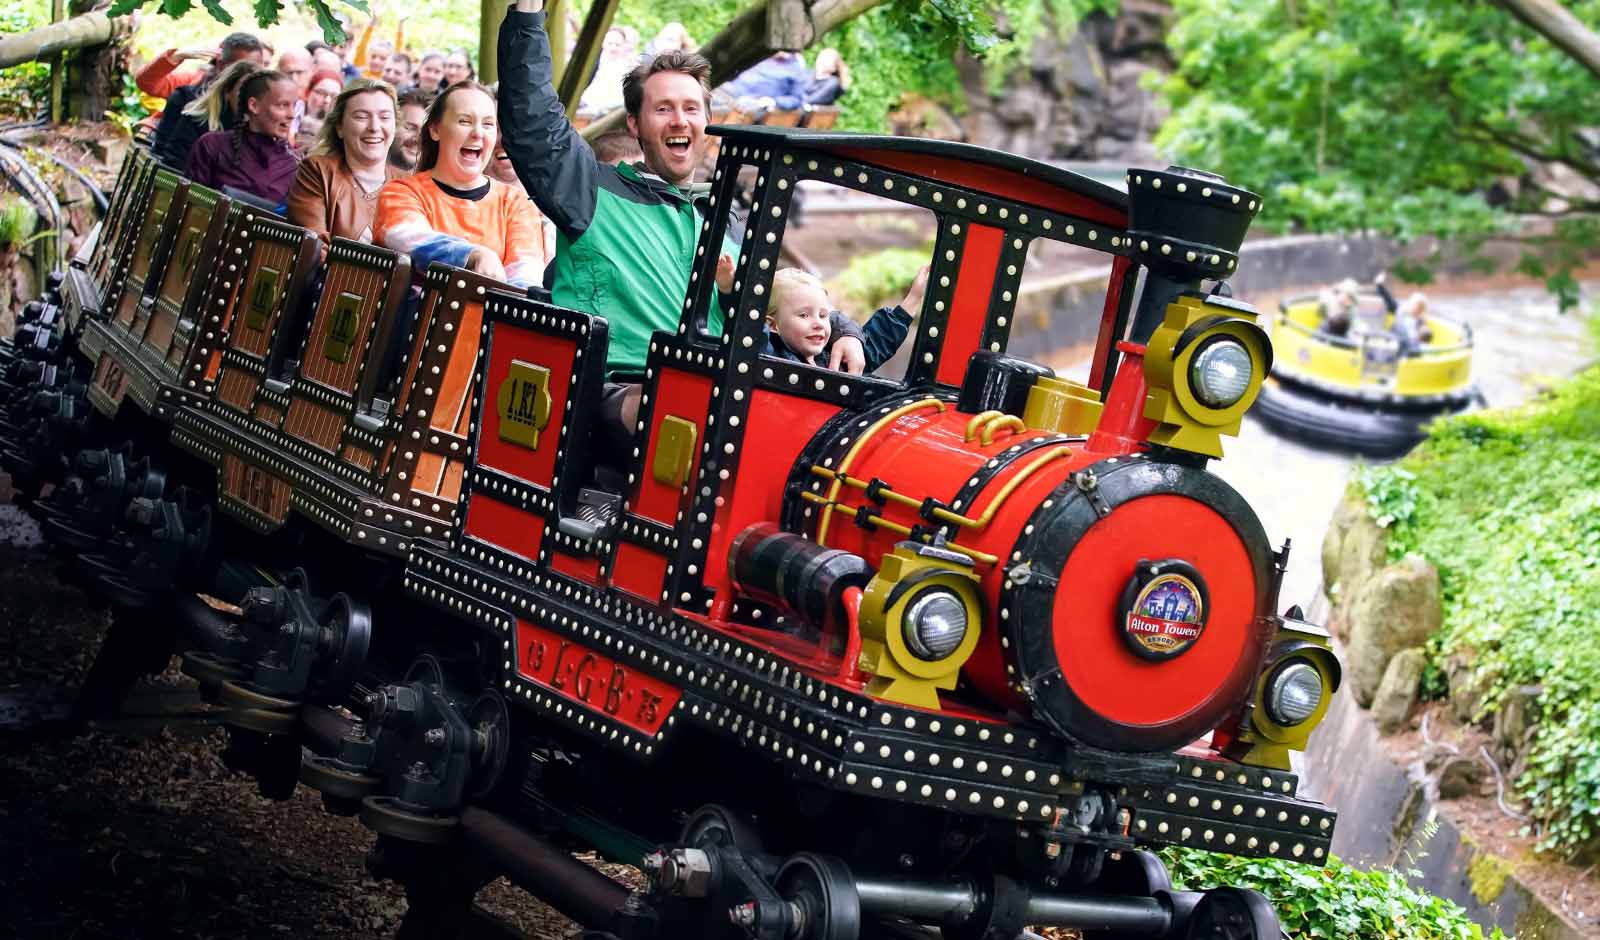 Dive into a world of thrilling adventures at Alton Towers